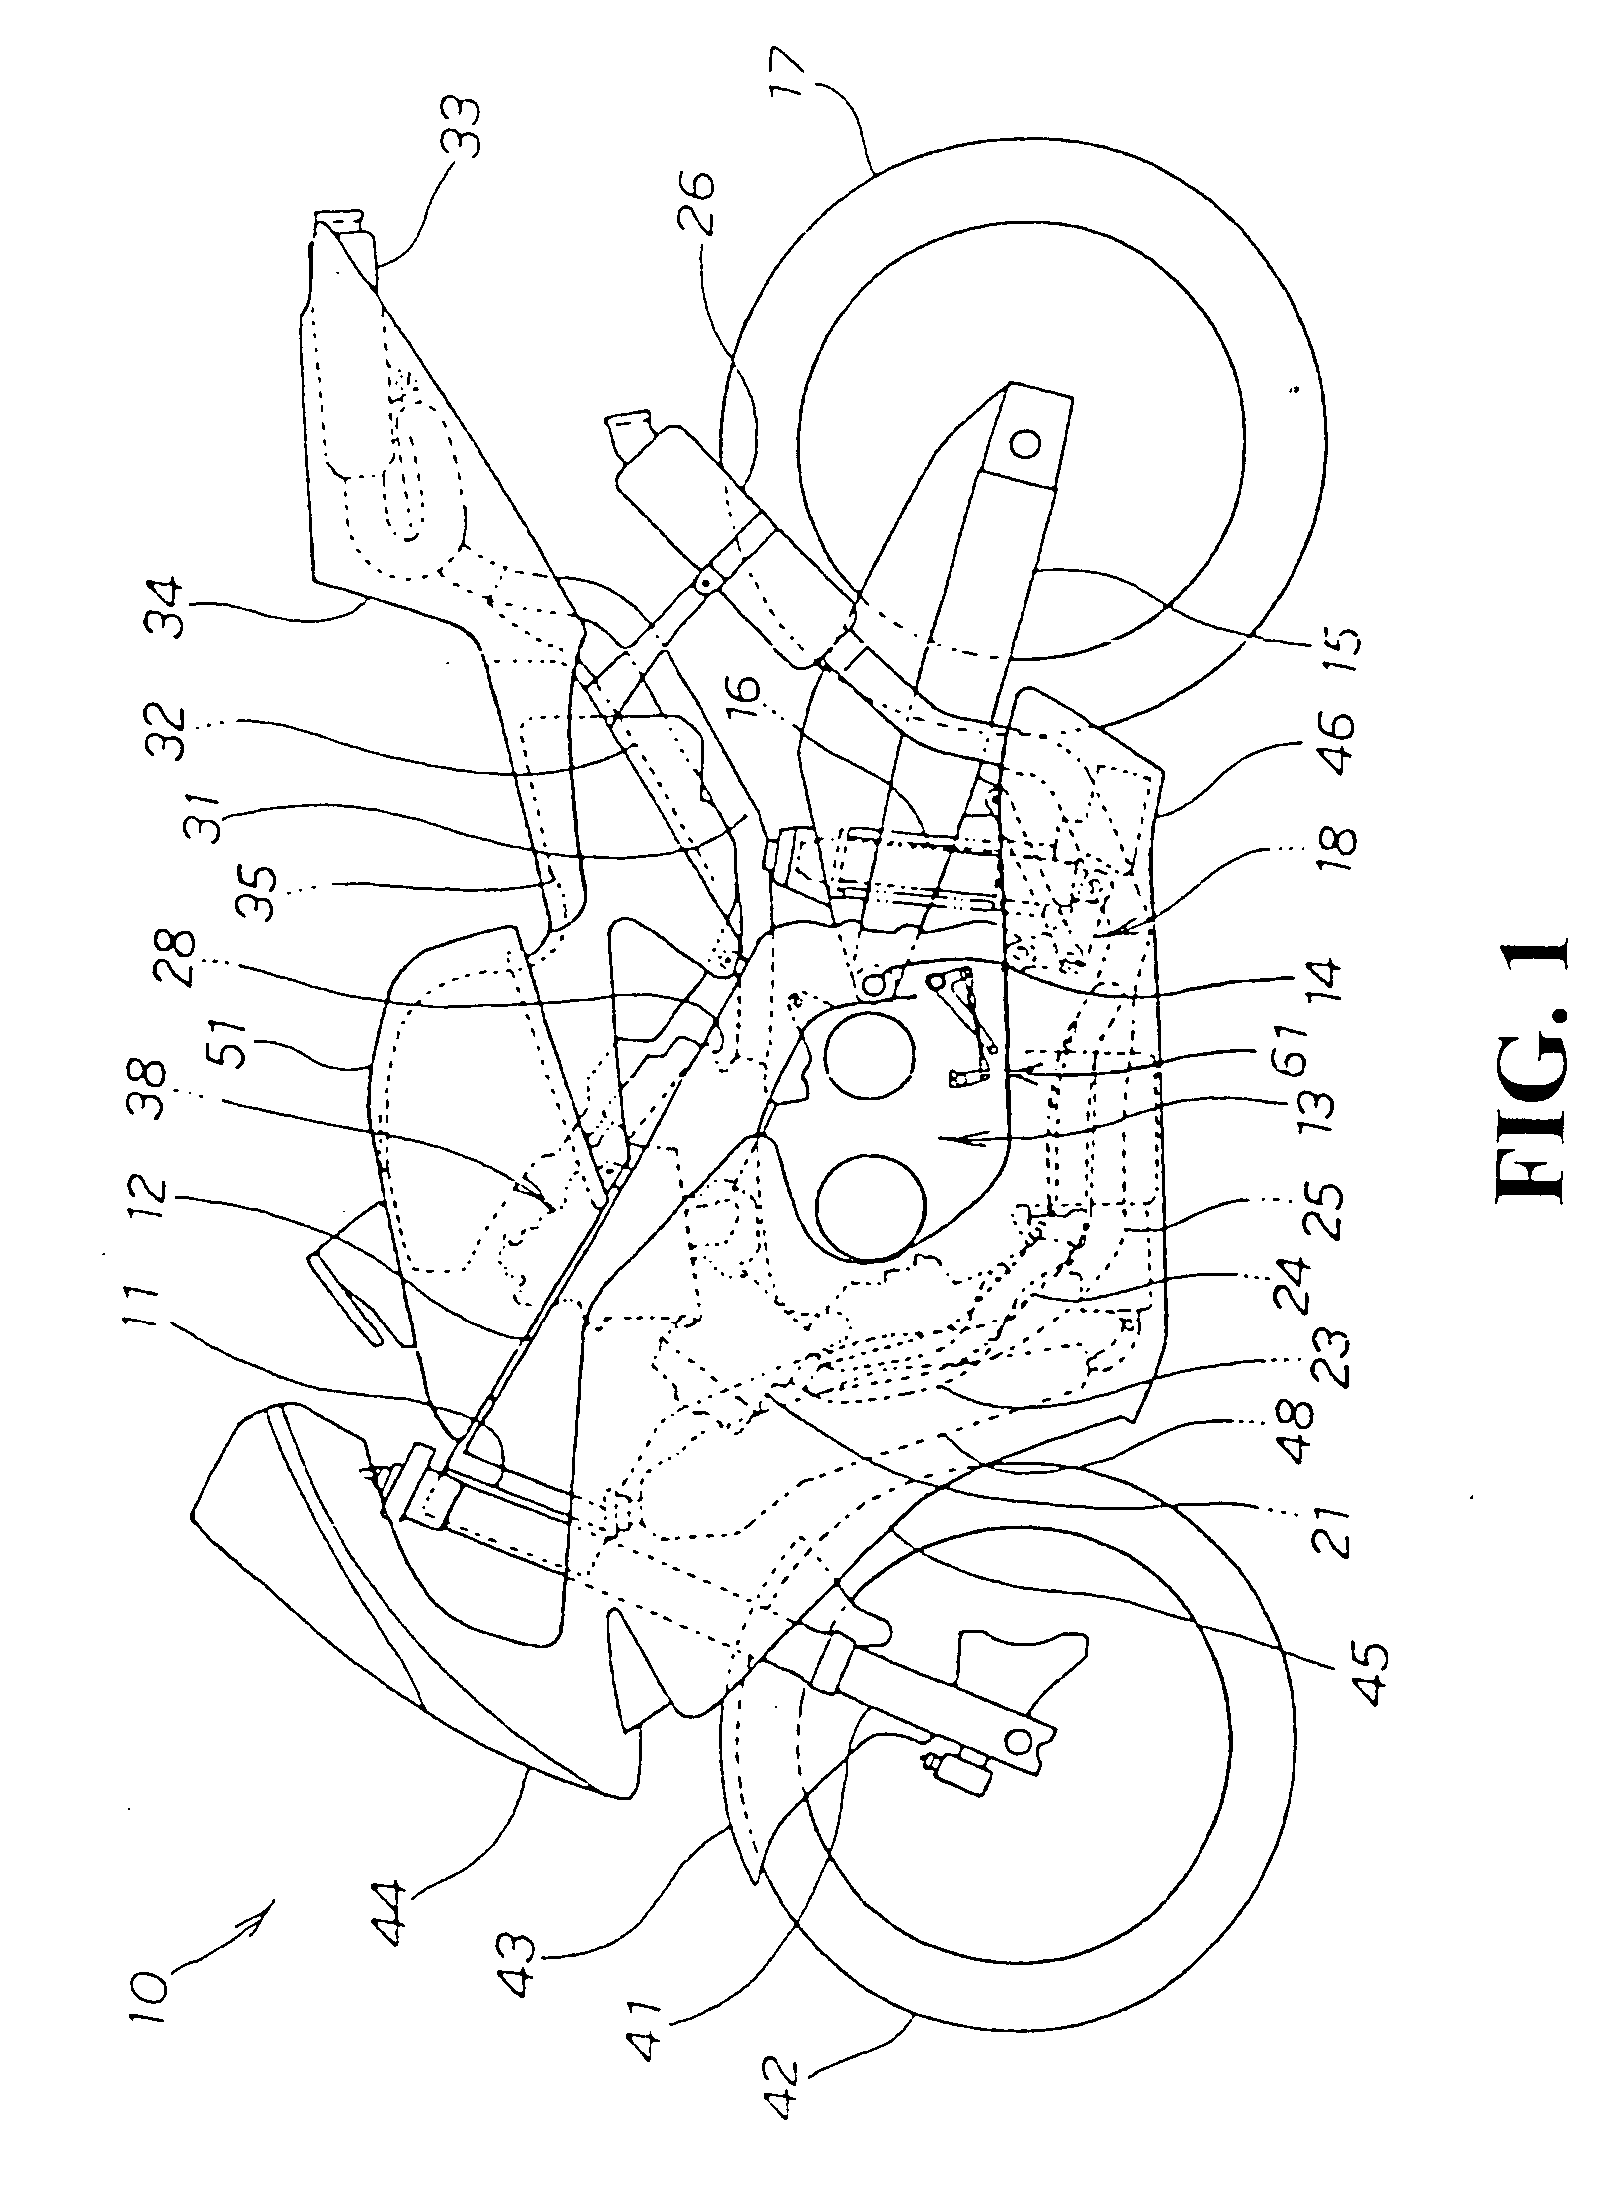 Transmission control device of motorcycle